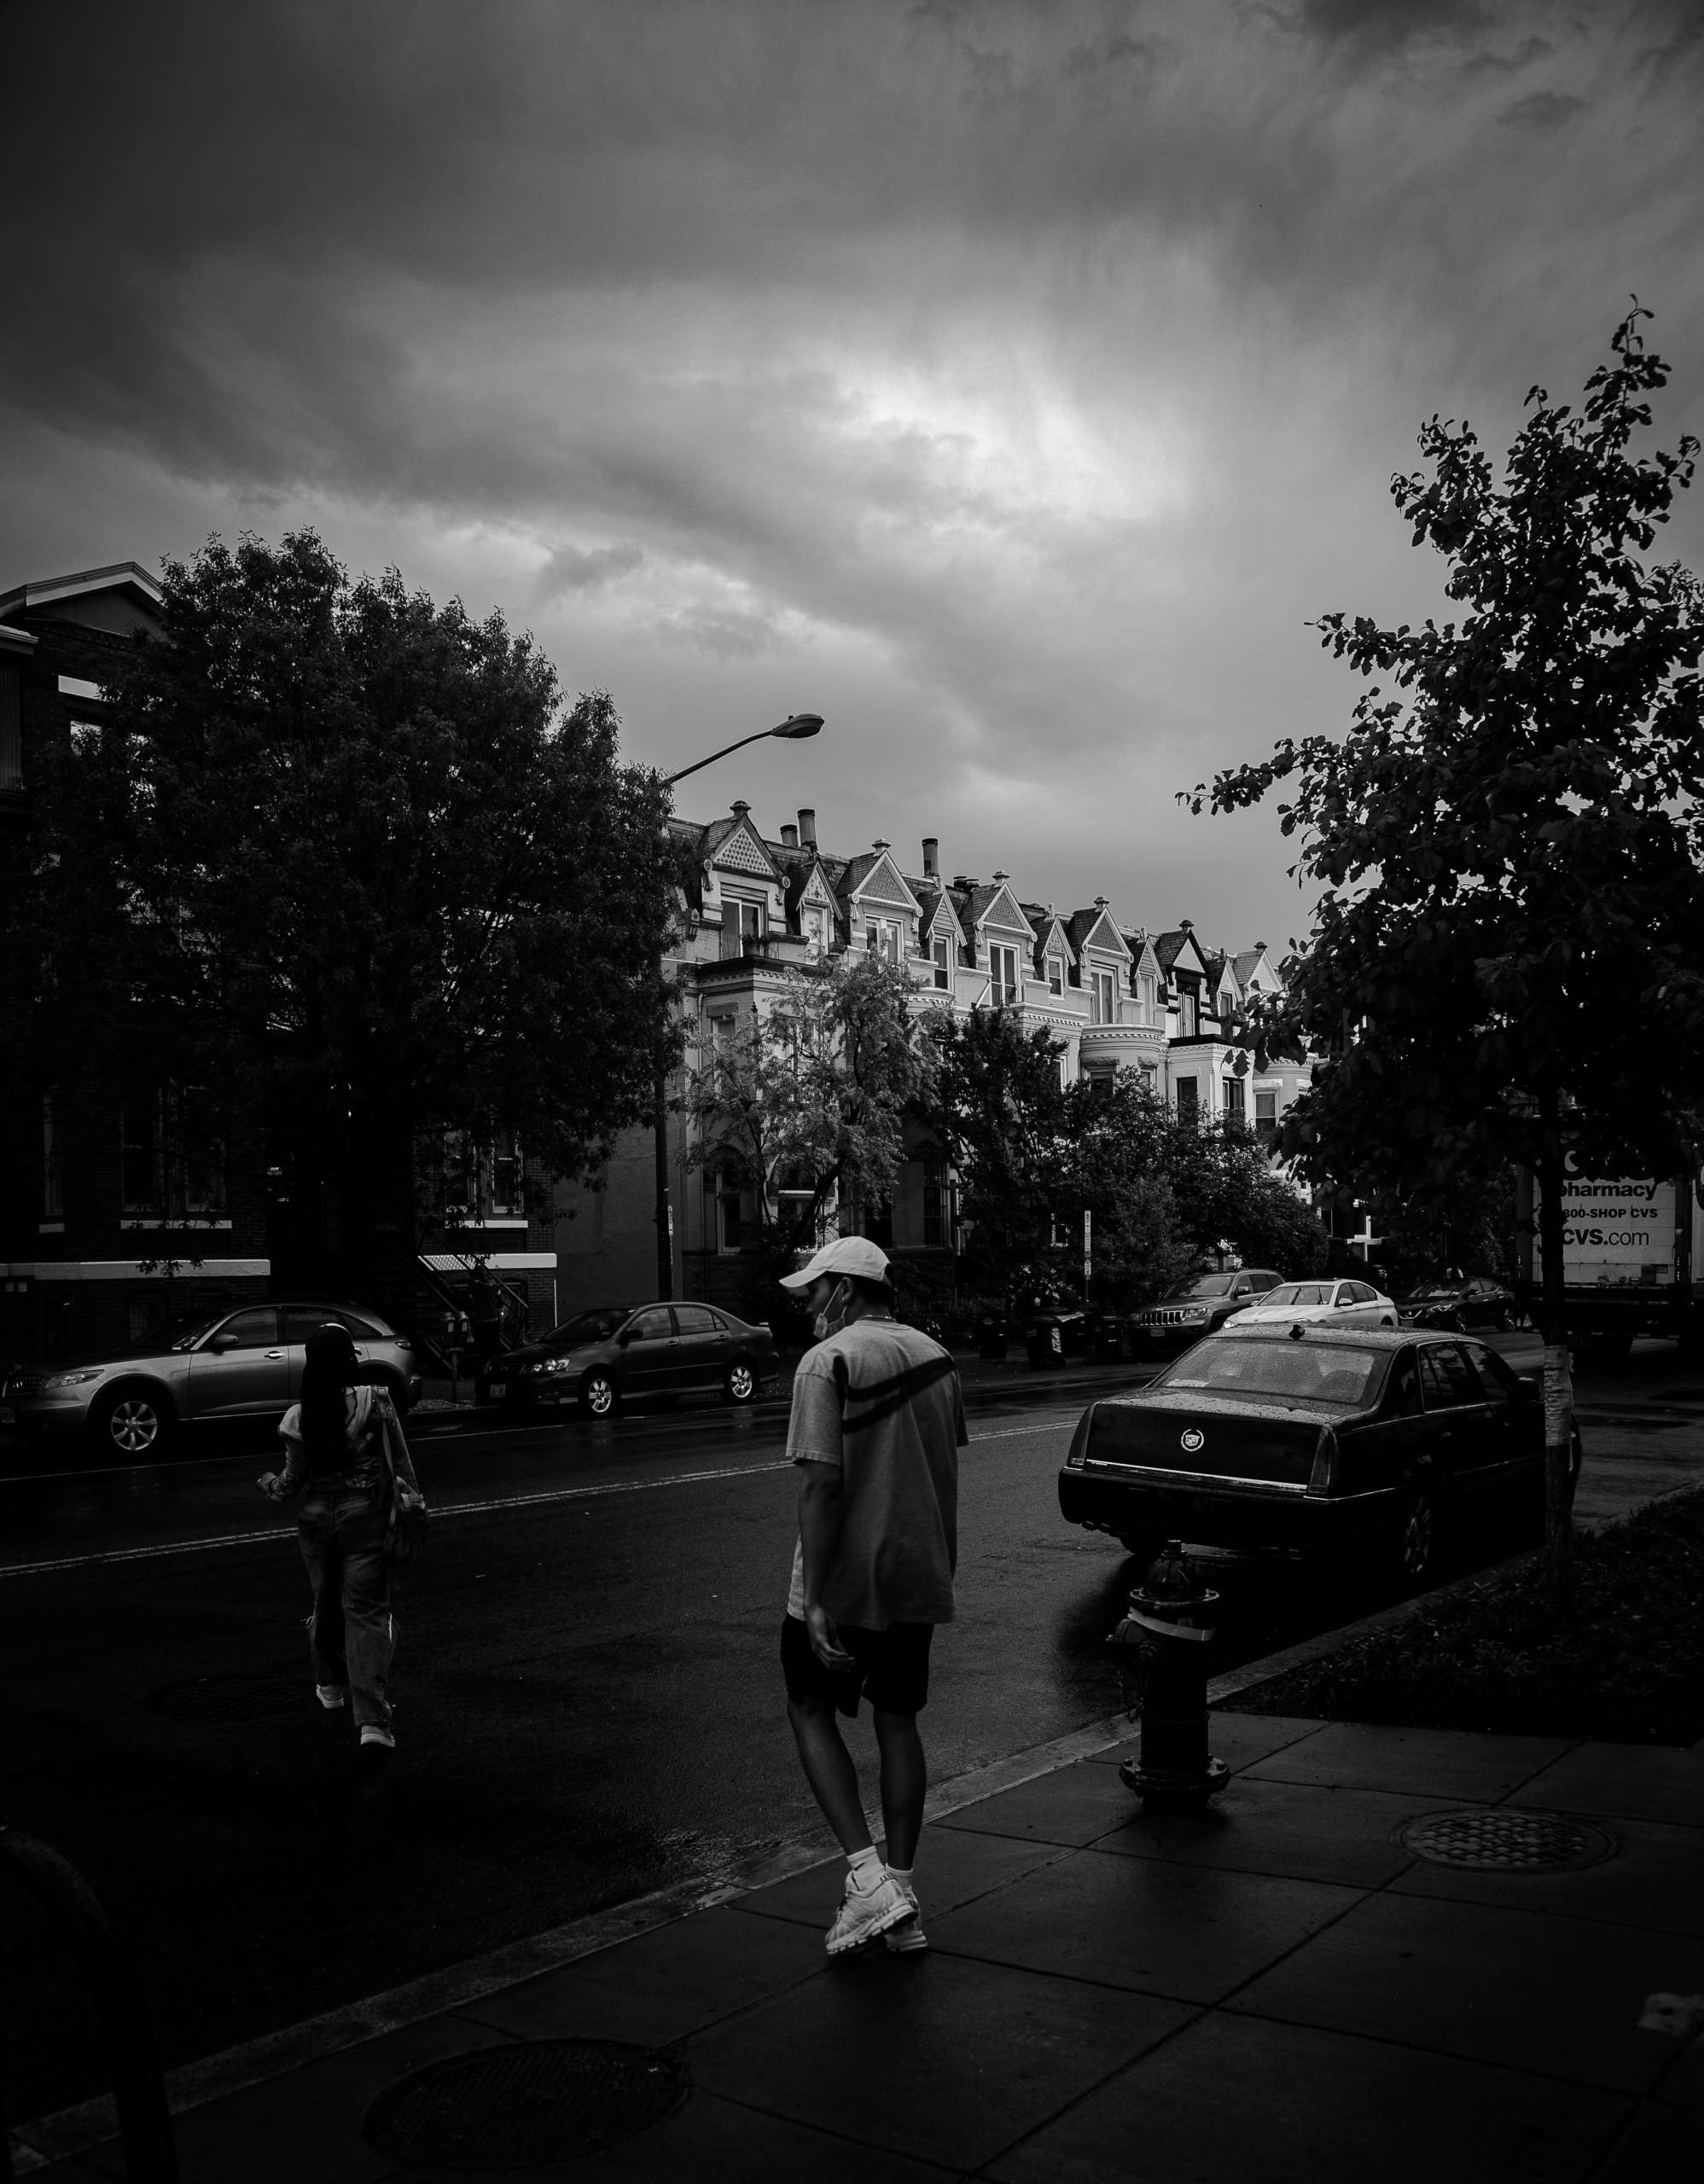 A black-and-white photo. A person in casual clothes and a baseball cap stands at the curb of a residential city street, waiting to cross. A second person with long hair has already started crossing the street. In the background are trees and a row of apartments with pointed roofs.